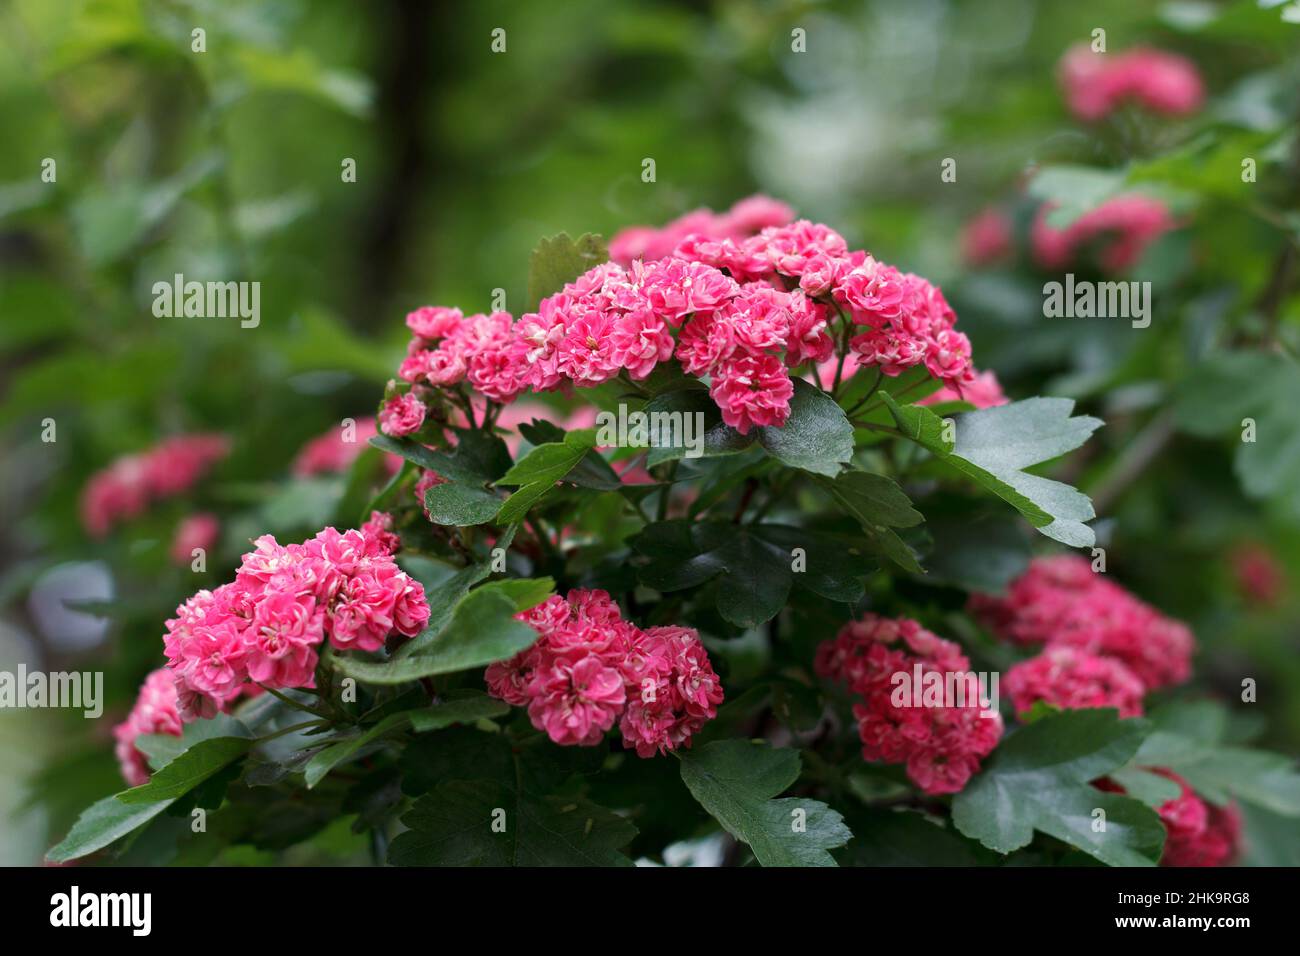 Crataegus laevigata beauty medicinal plant blooms red flowers on green background in spring Stock Photo